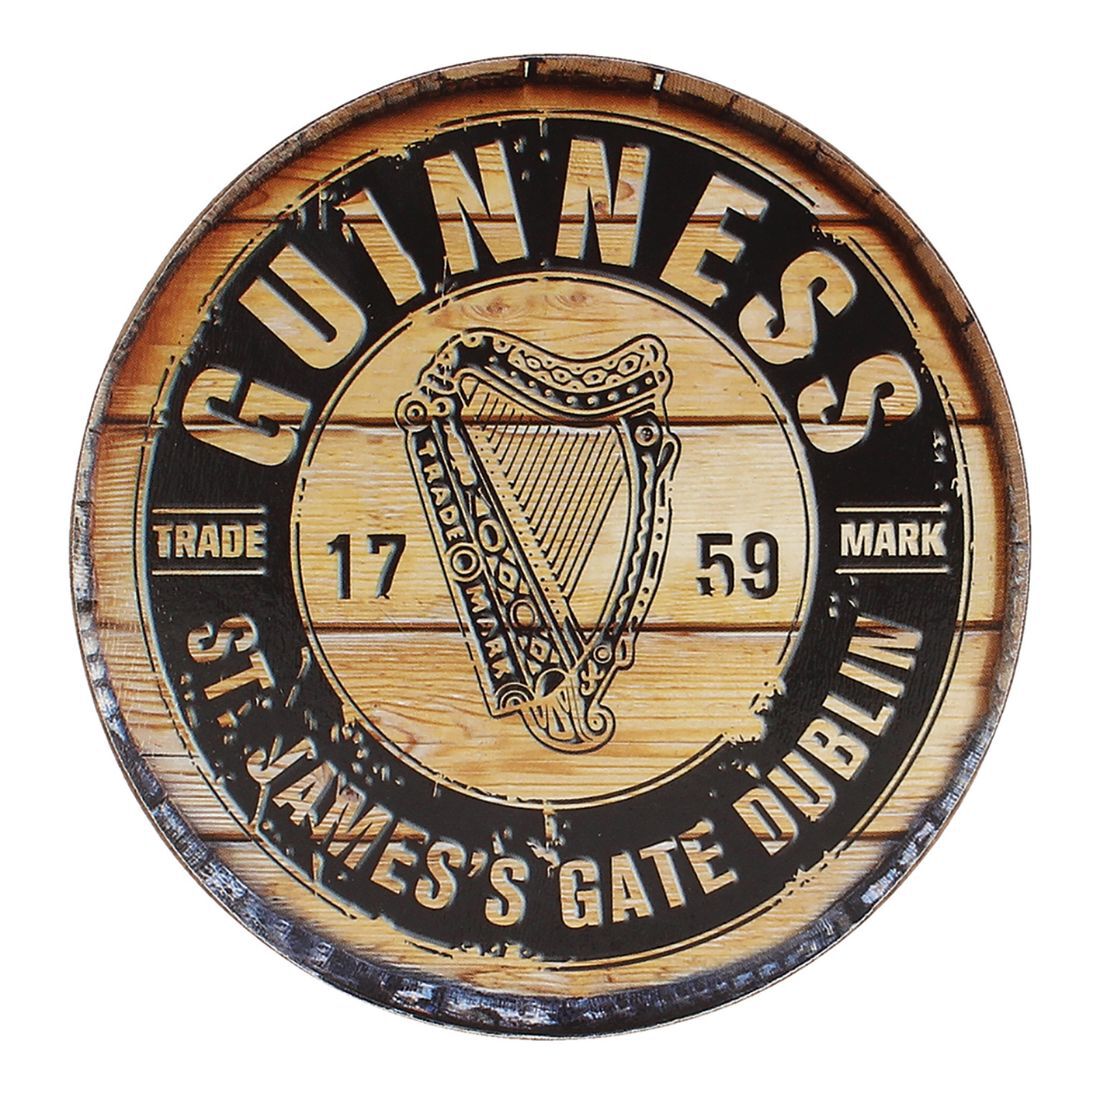 IRELAND 2013 GUINNESS MADE OF MORE odd-shaped Stout Beer COASTER Mat with HARP 